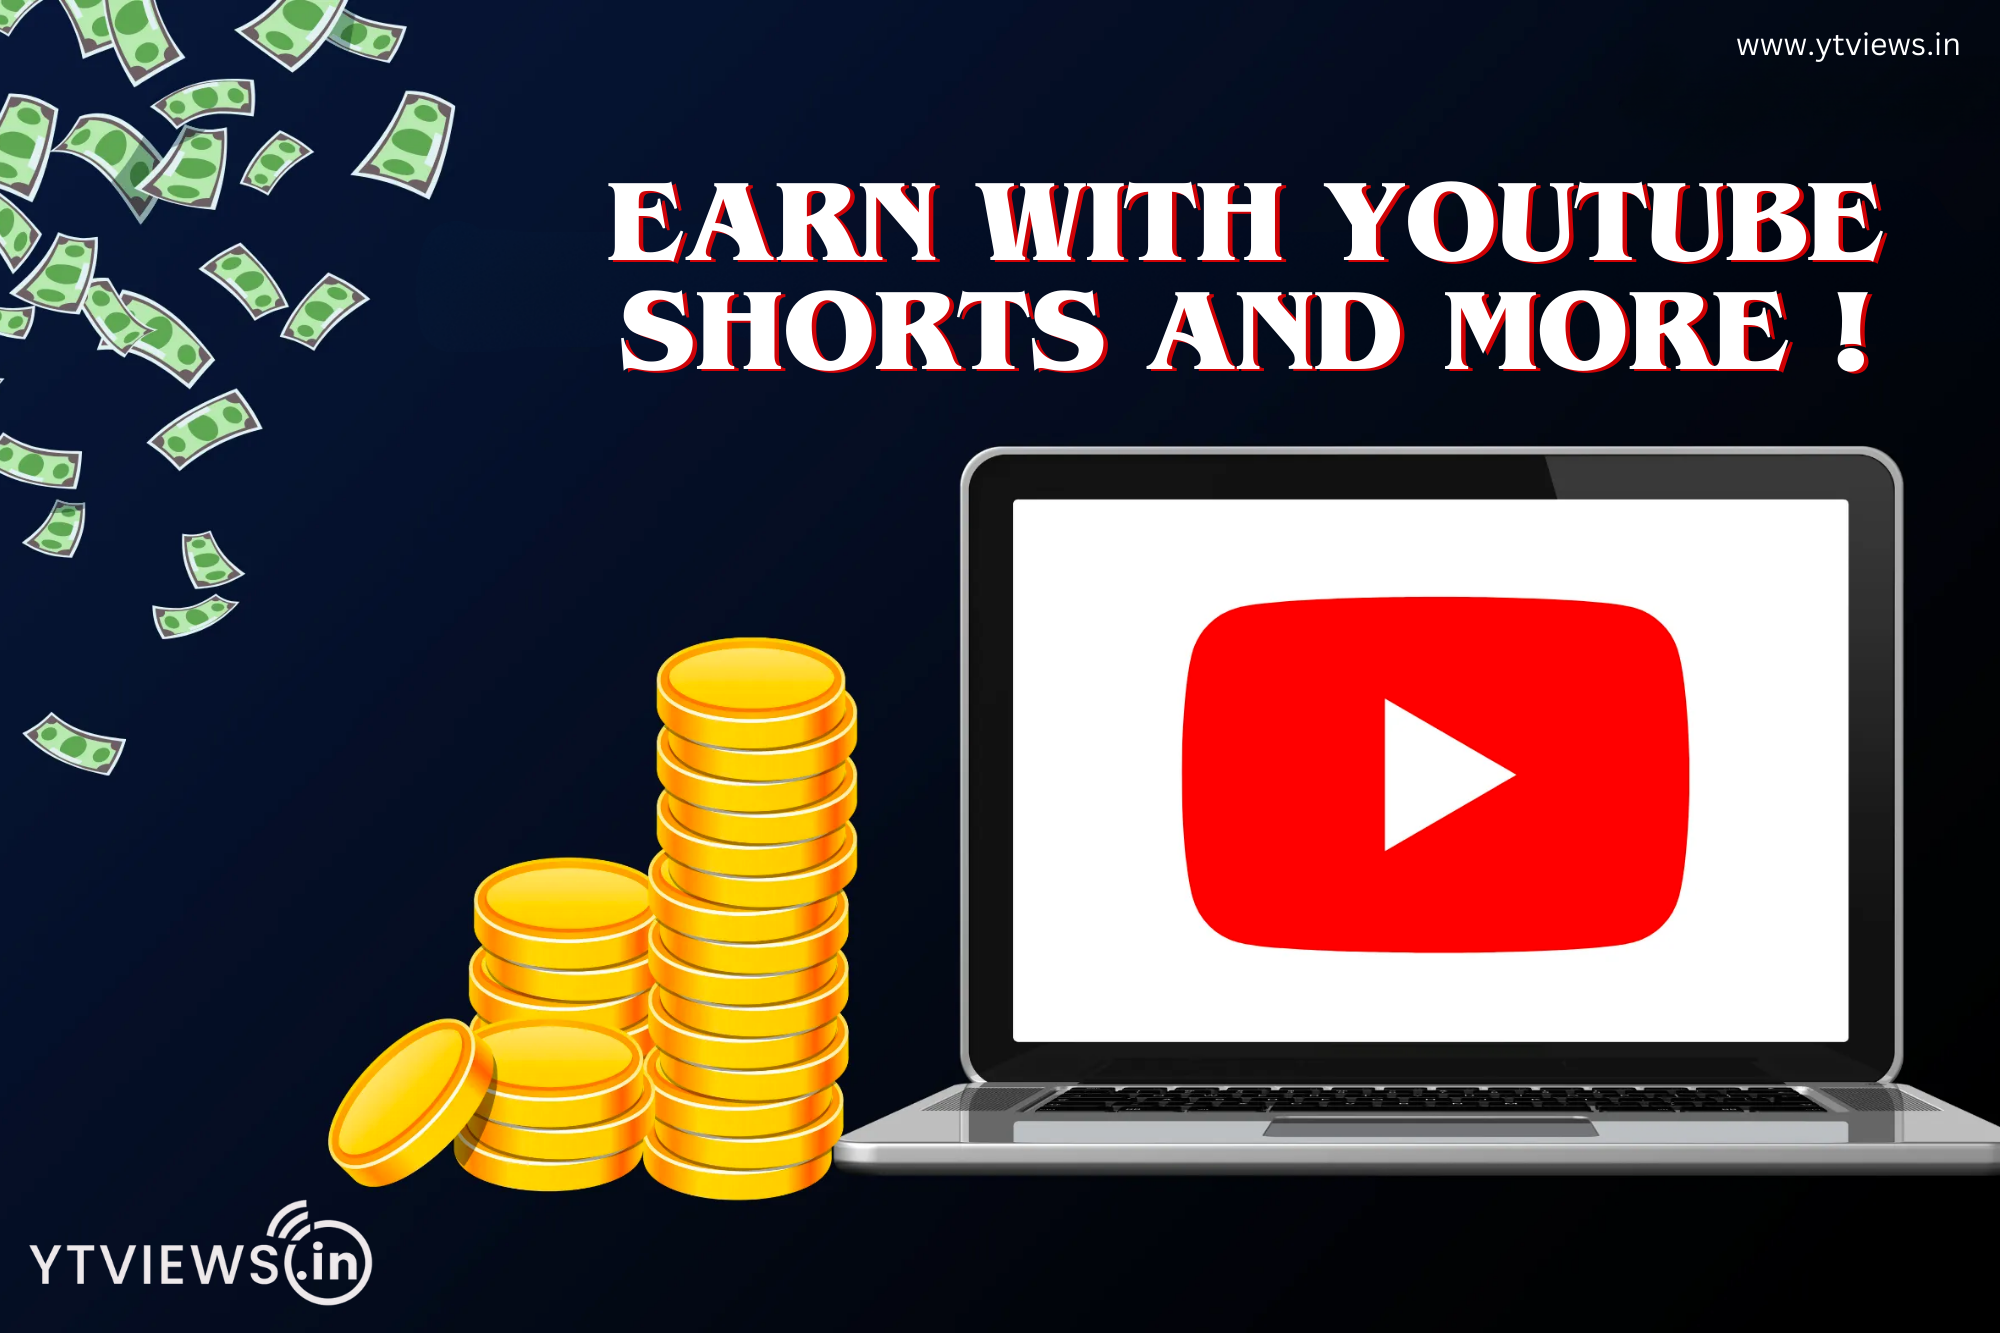 Earn with YouTube Shorts and more!